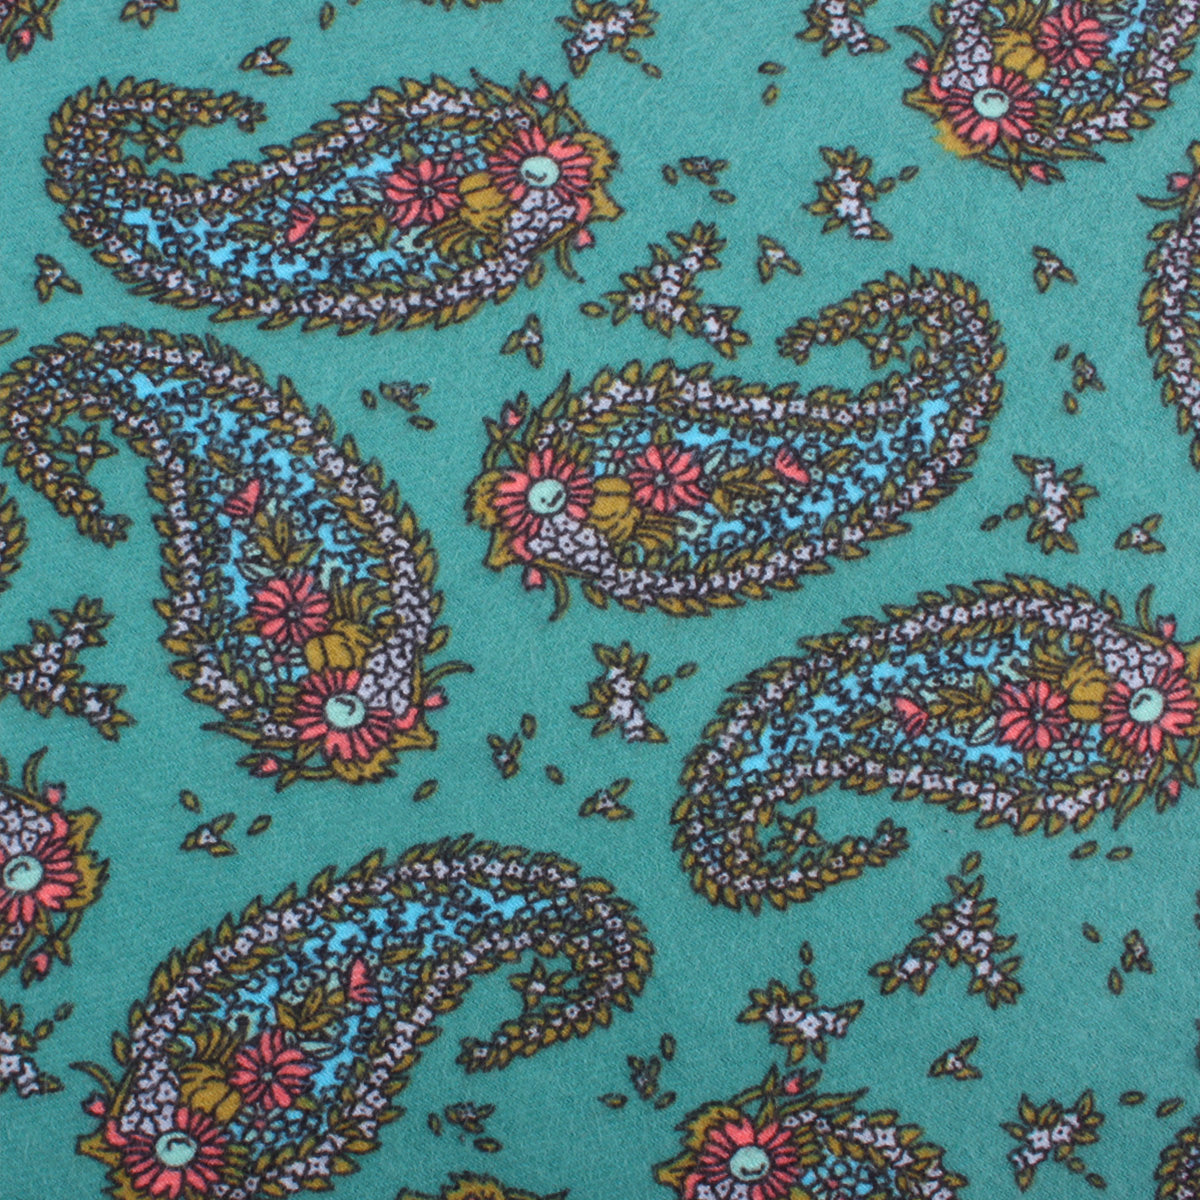 Amer Fort Teal Paisley Pocket Square Fabric